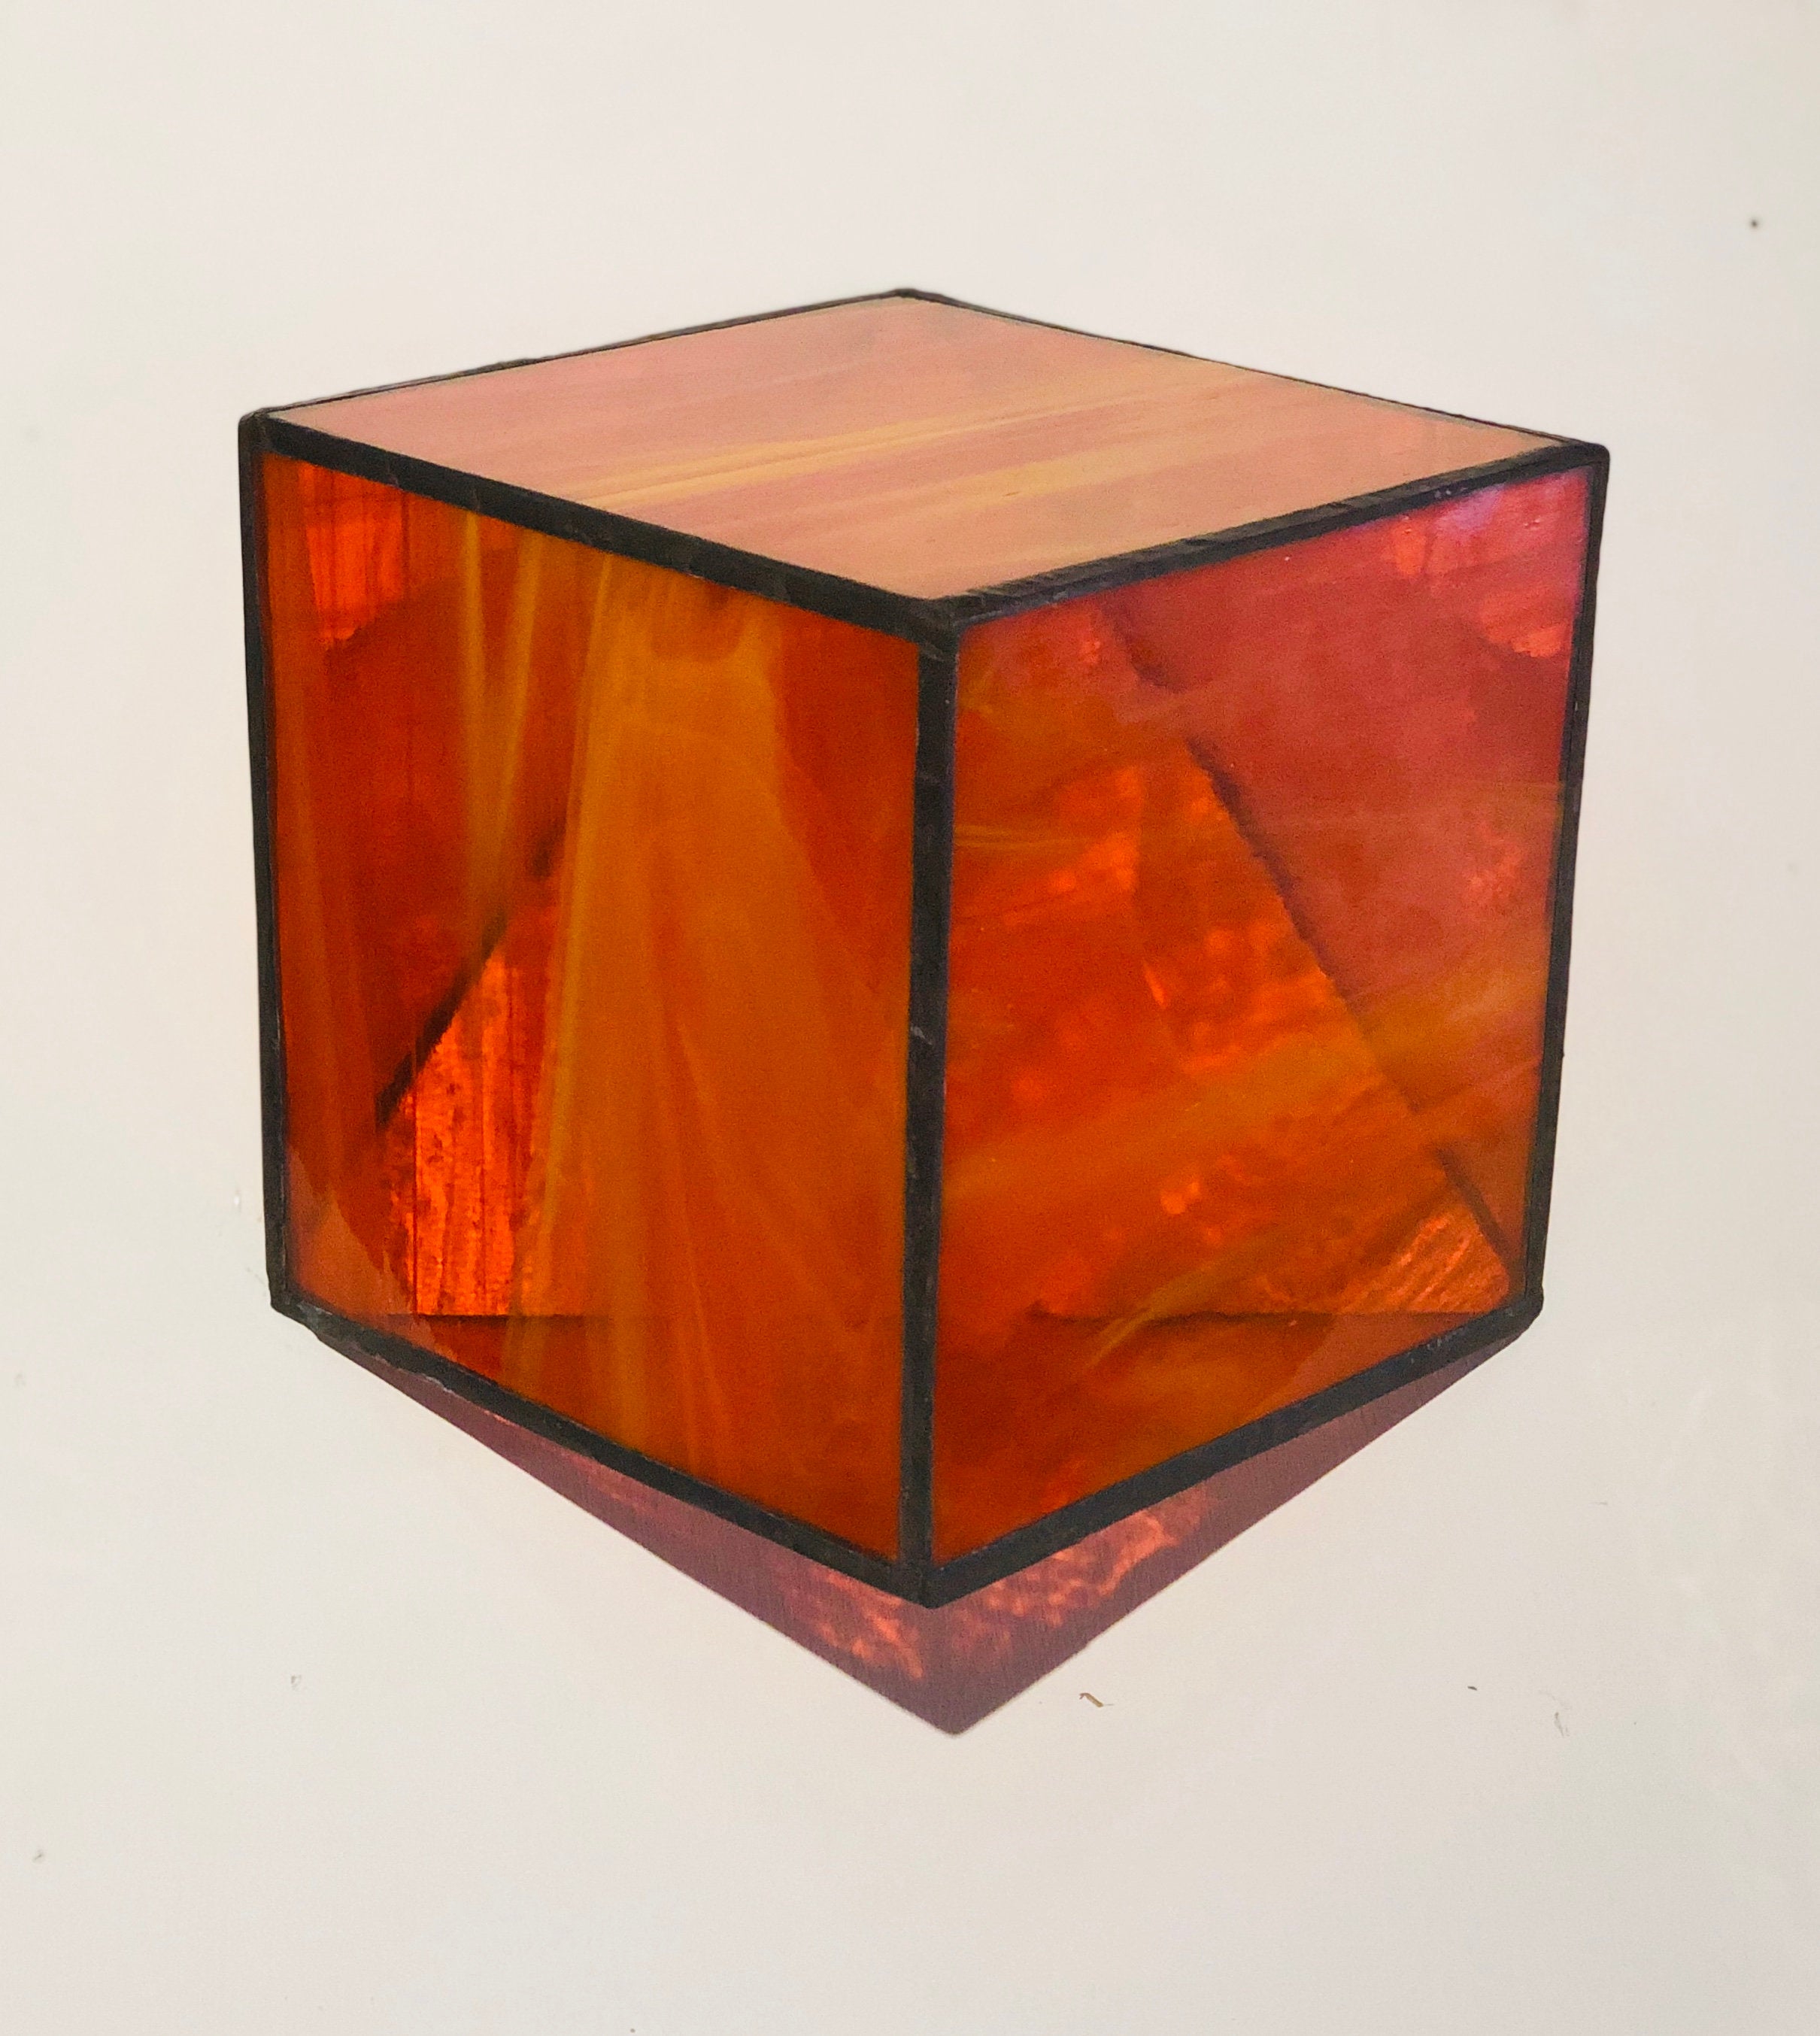 Stained Orange semi transparent glass 3D geometric cube wall or table top decoration Sculpture Tiffany technique - Large, Platonic Solid